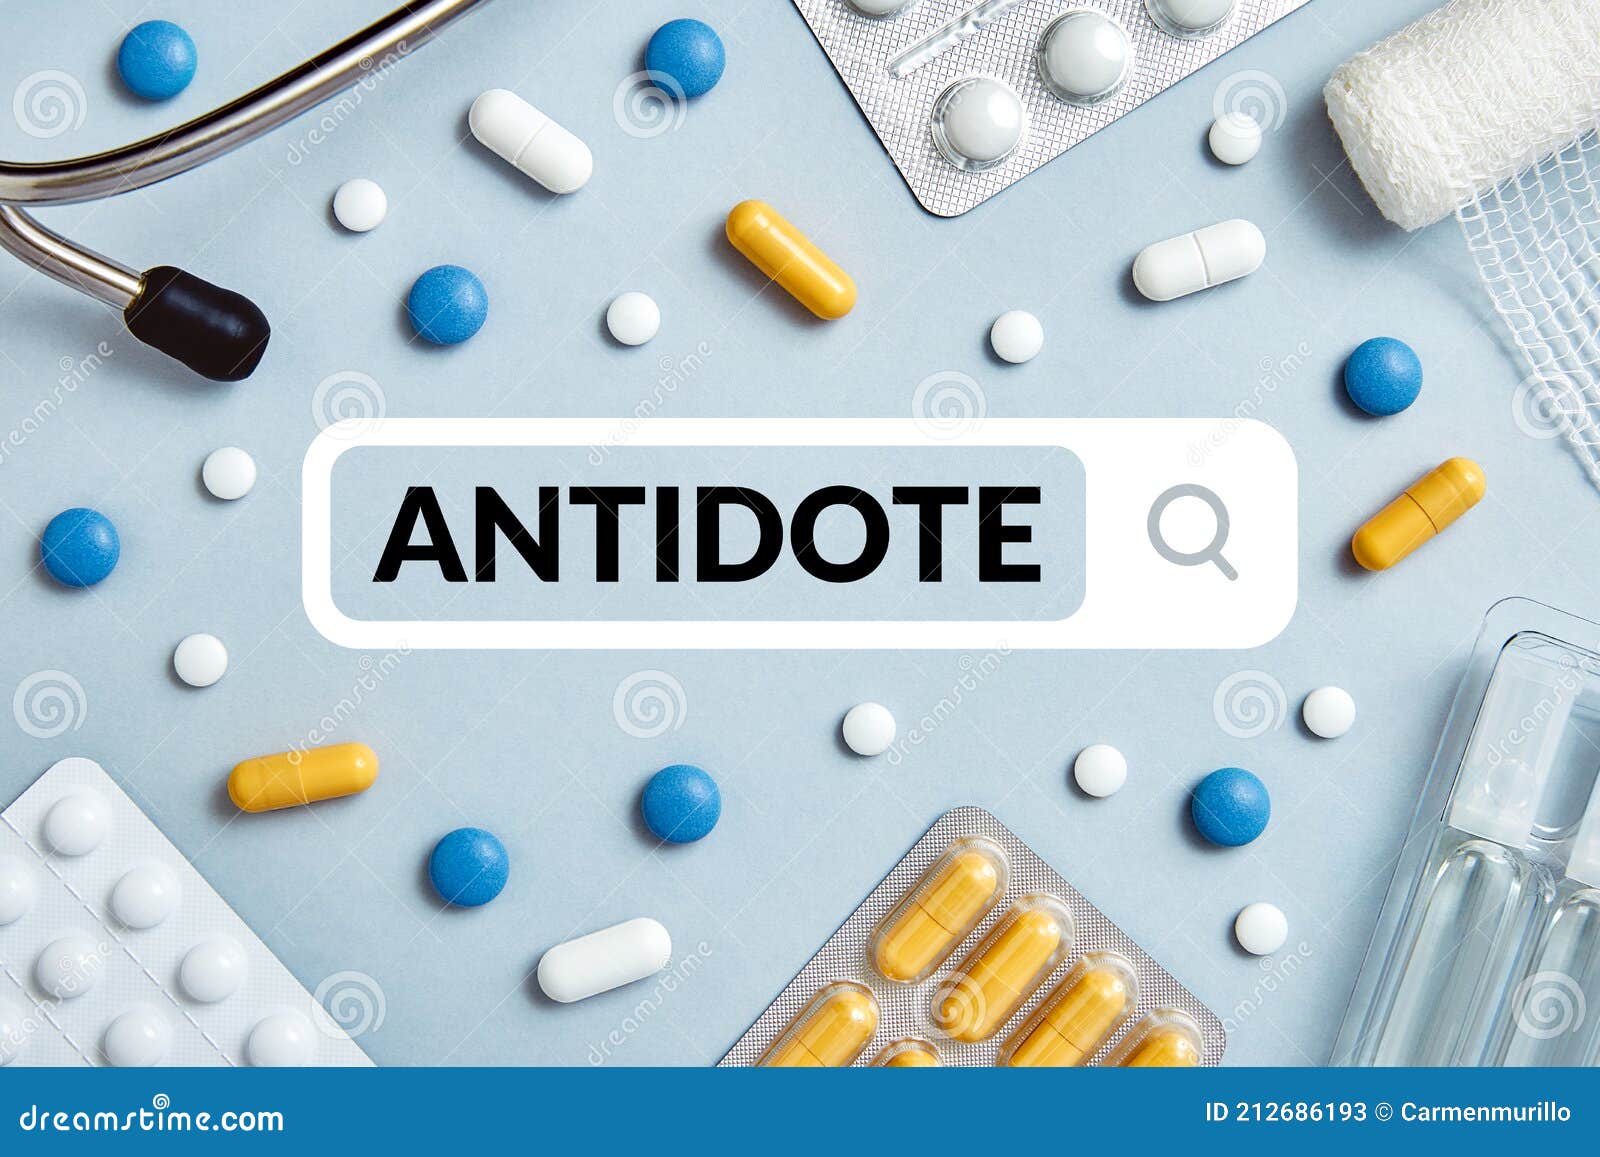 antidote medical concept